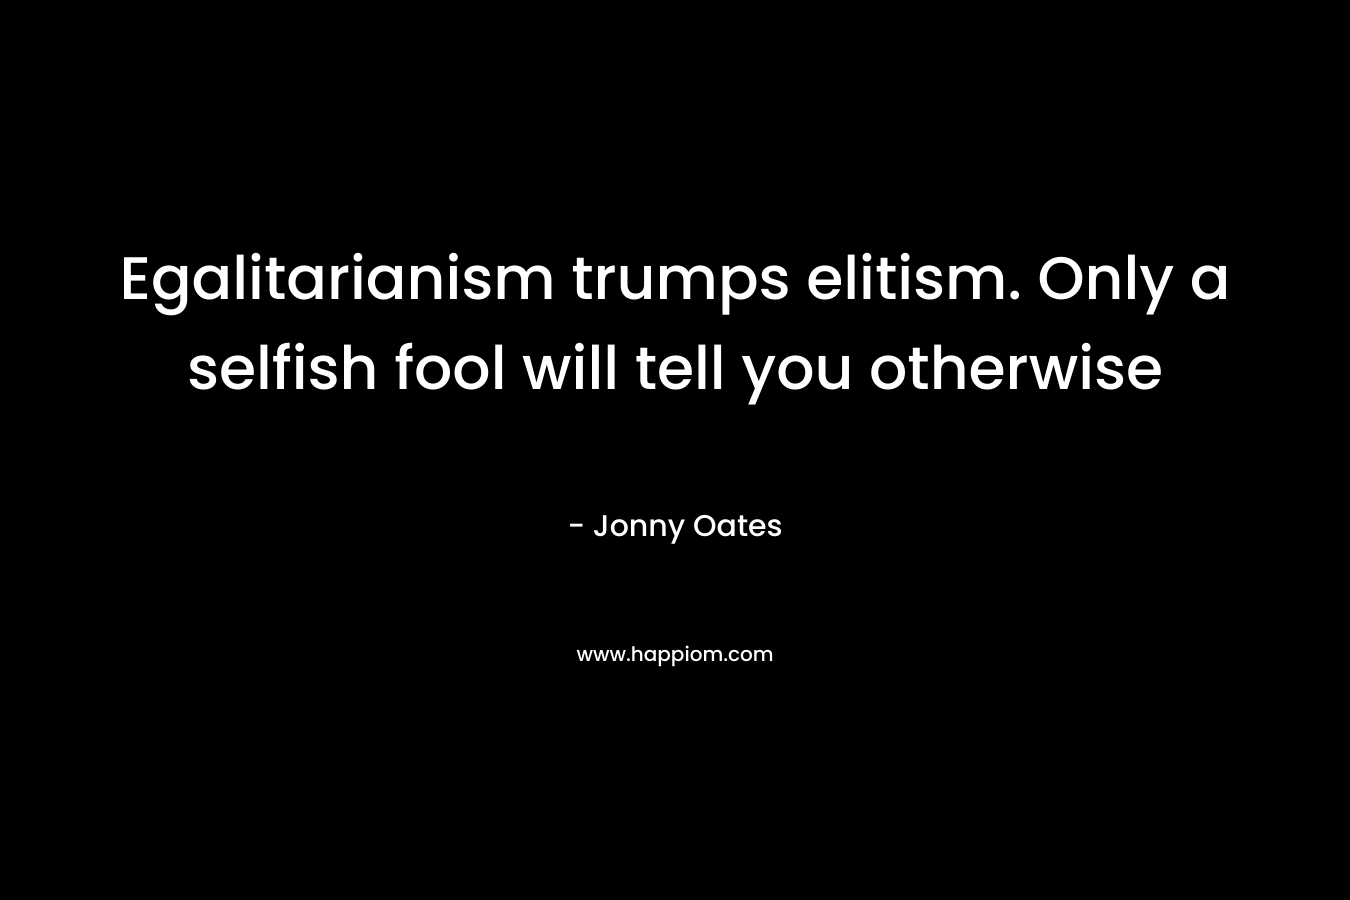 Egalitarianism trumps elitism. Only a selfish fool will tell you otherwise